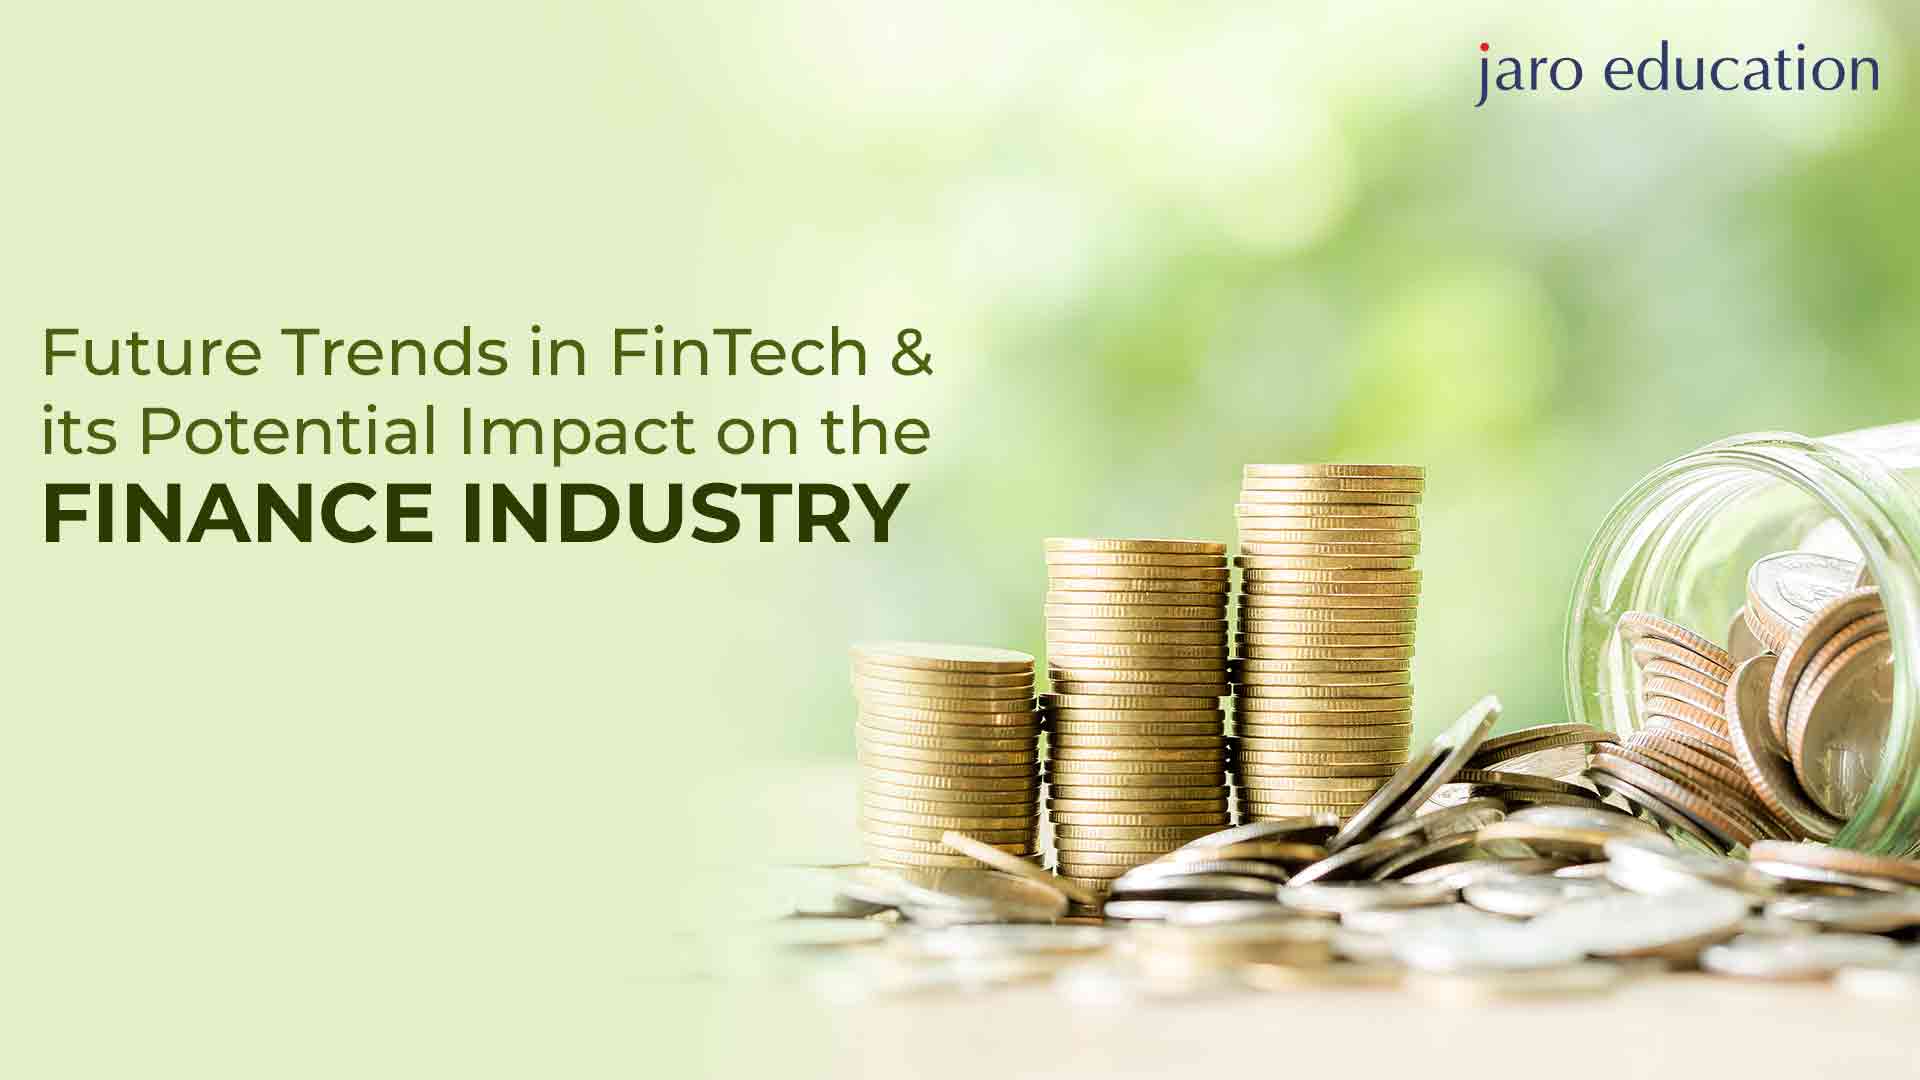 Future-Trends-in-FinTech-&-its-Potential-Impact-on-the-Finance-Industry-Jaro